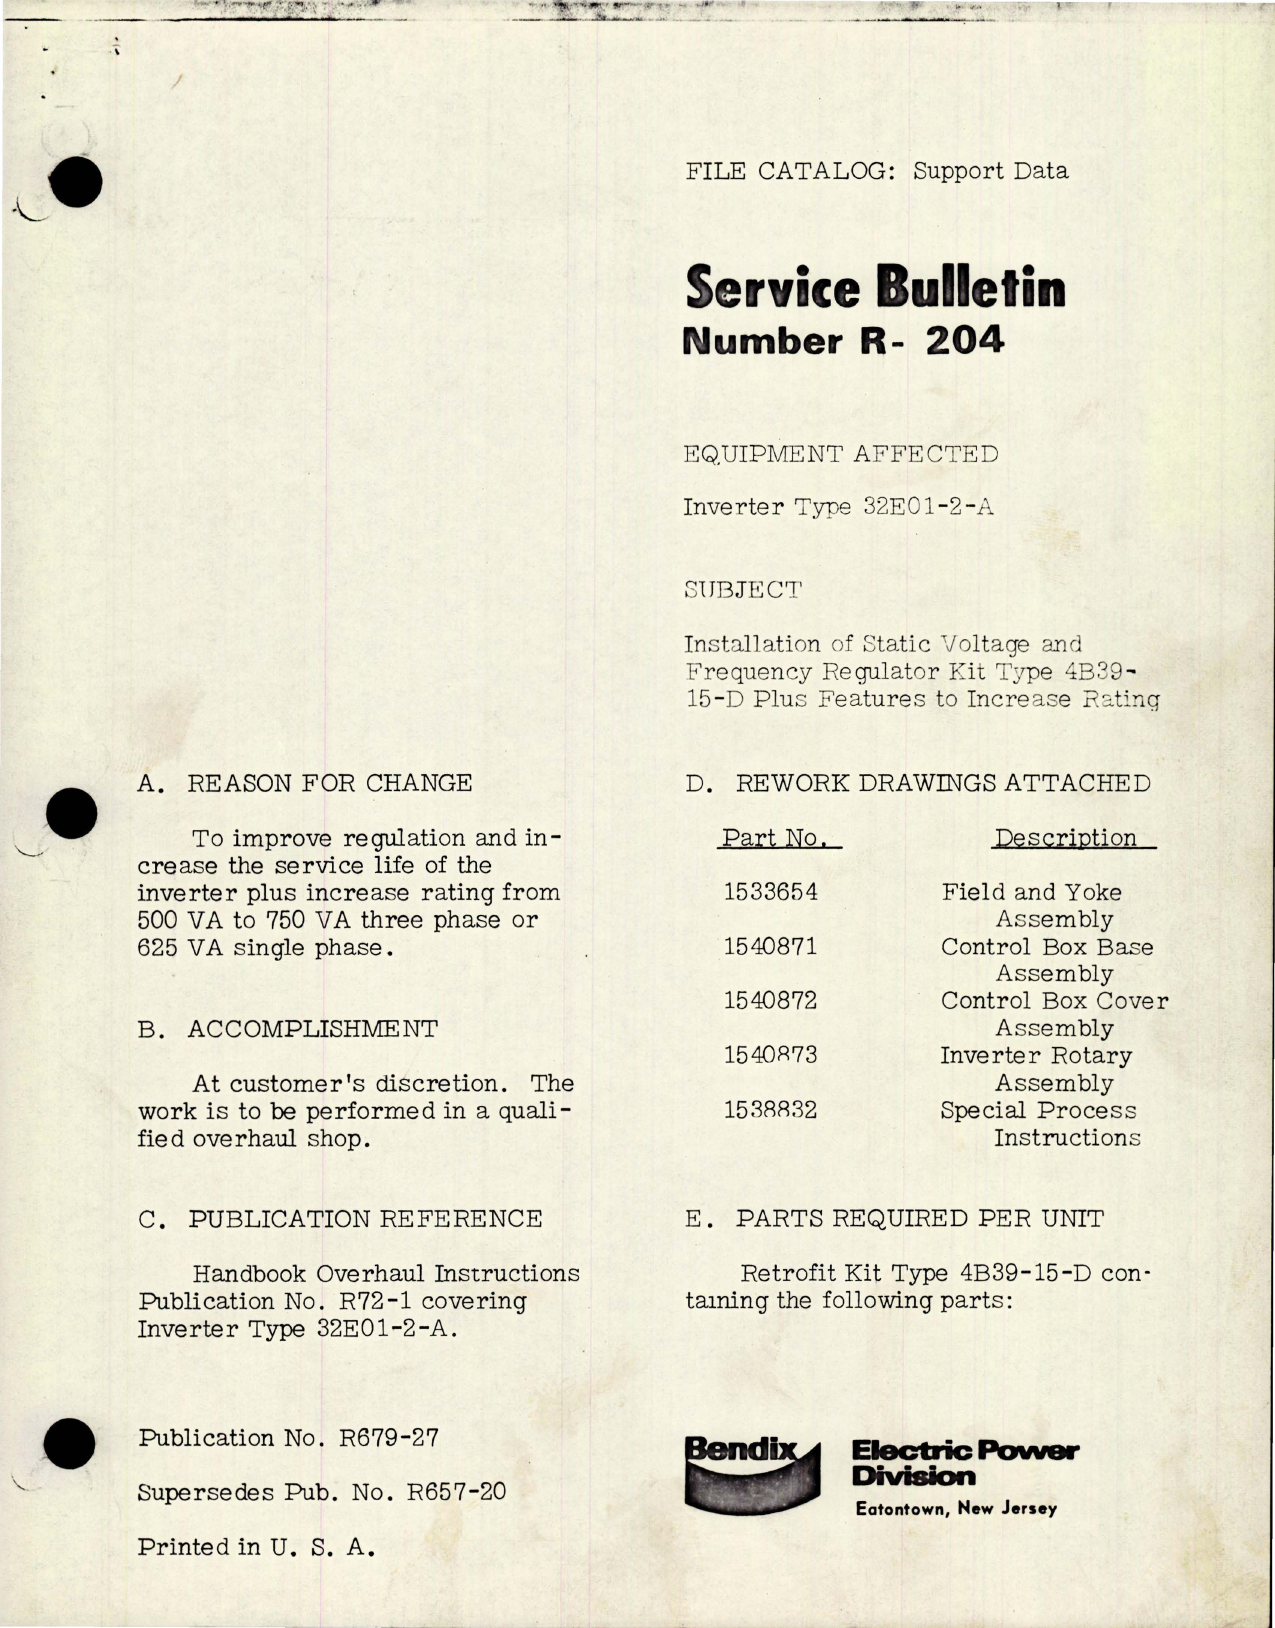 Sample page 1 from AirCorps Library document: Service Bulletin No. R-204, Installation of Static Voltage and Frequency Regulator Kit Type - 4B39-15-D